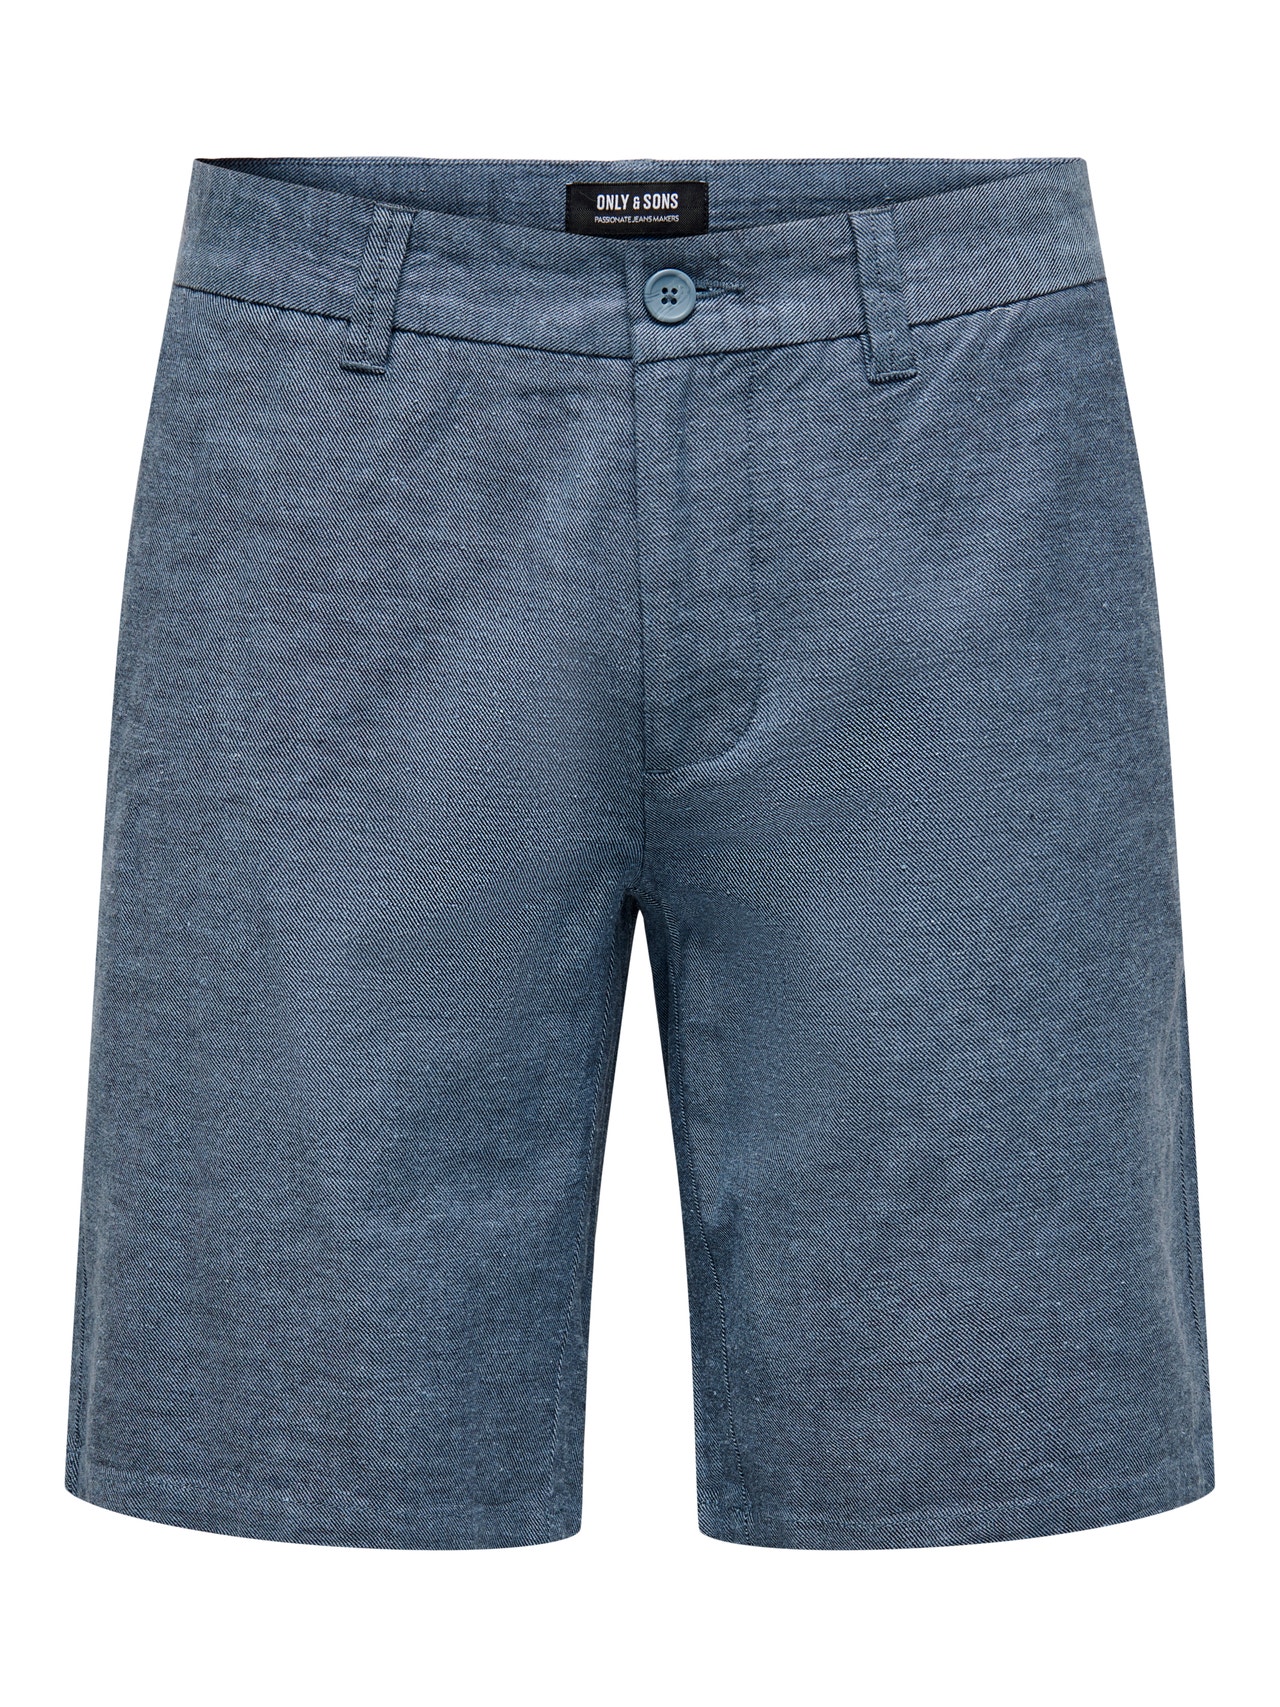 ONLY & SONS Normal passform Shorts -Dark Navy - 22024940